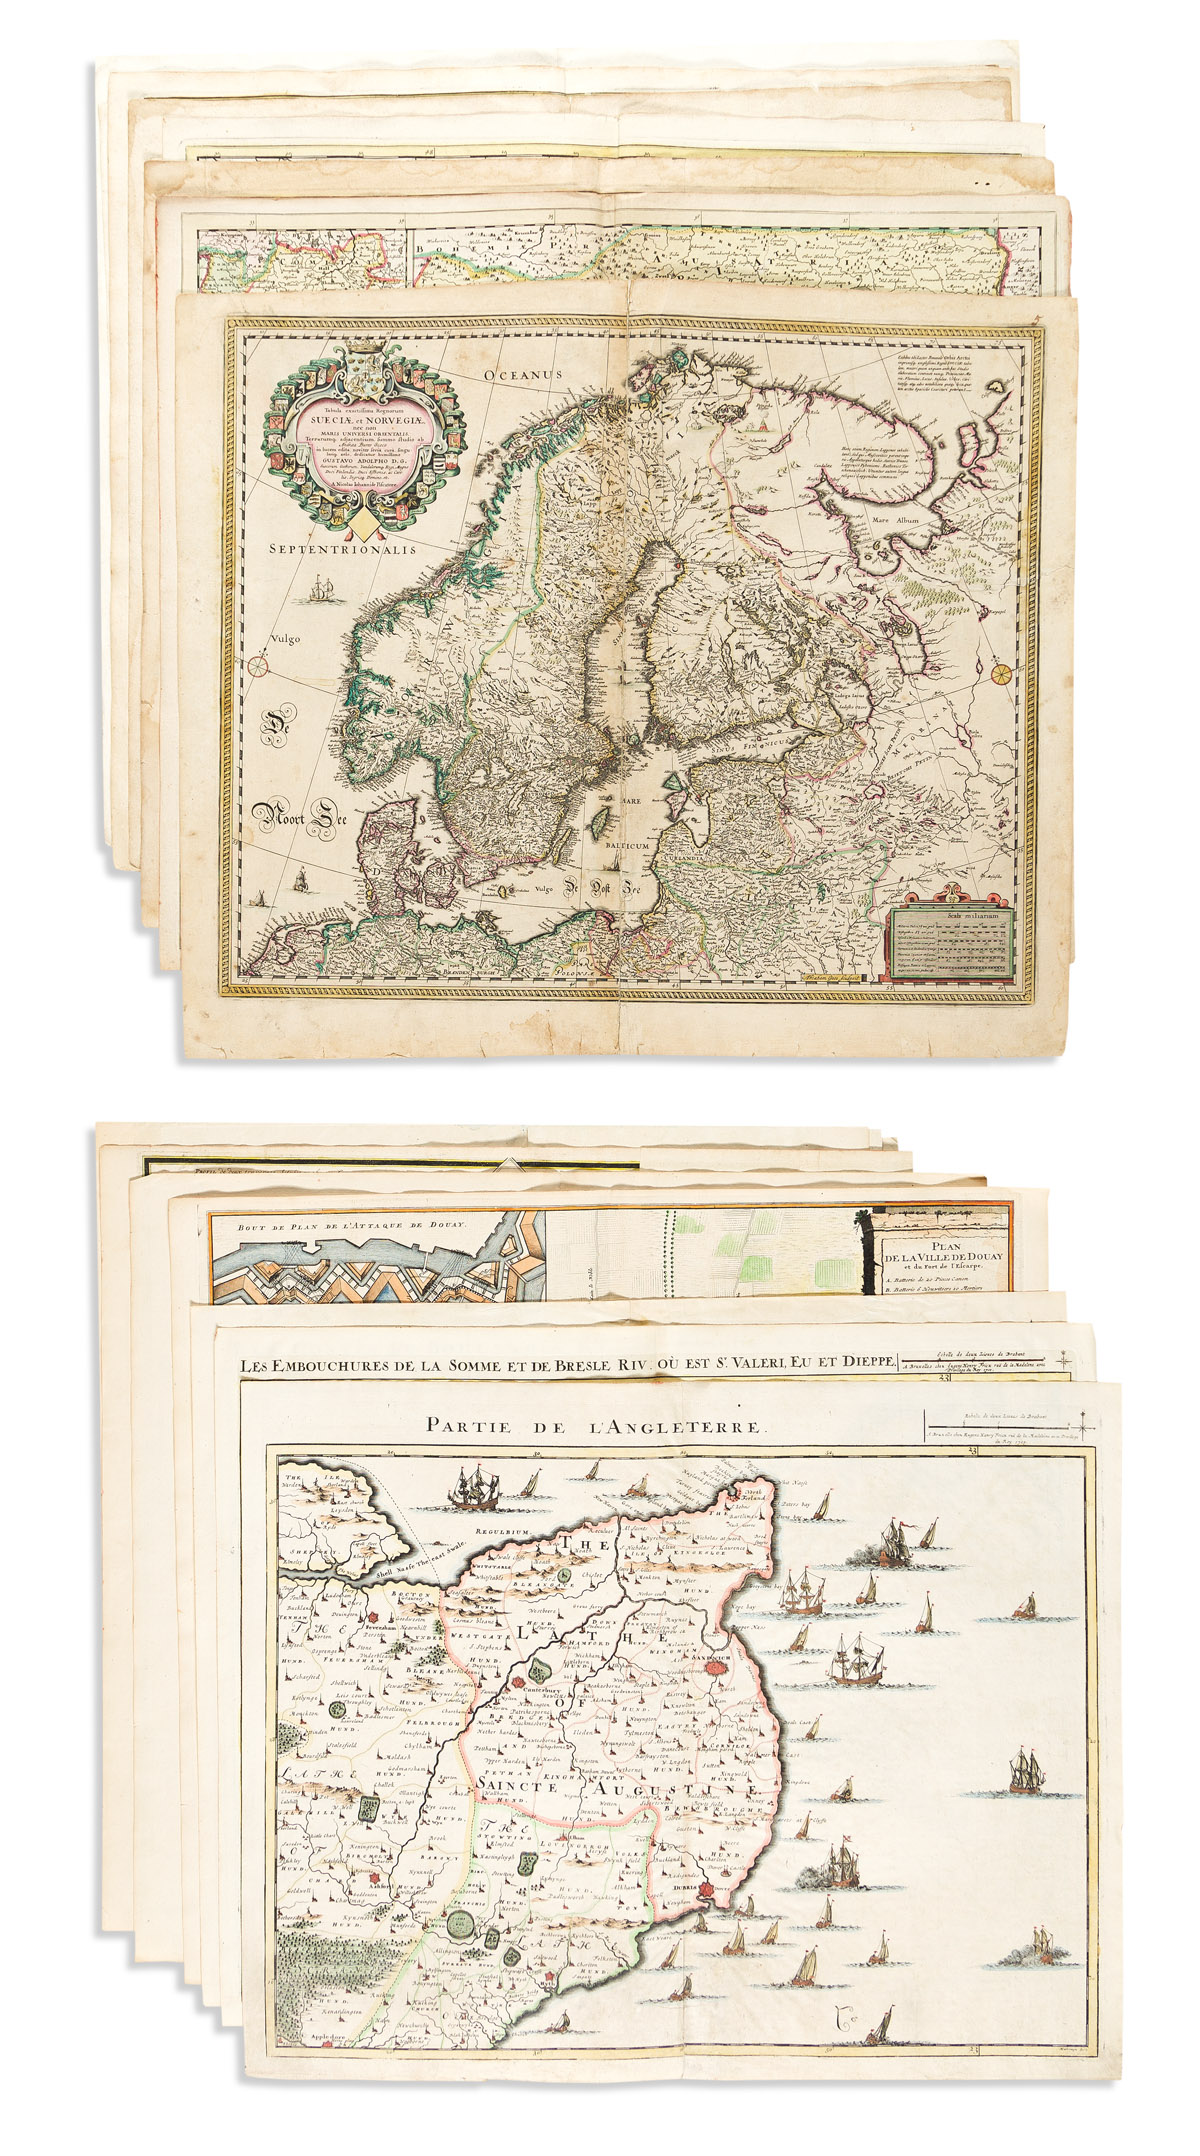 (MISCELLANEOUS MAPS.) Group of 18 double-page or folding engraved European regional maps.